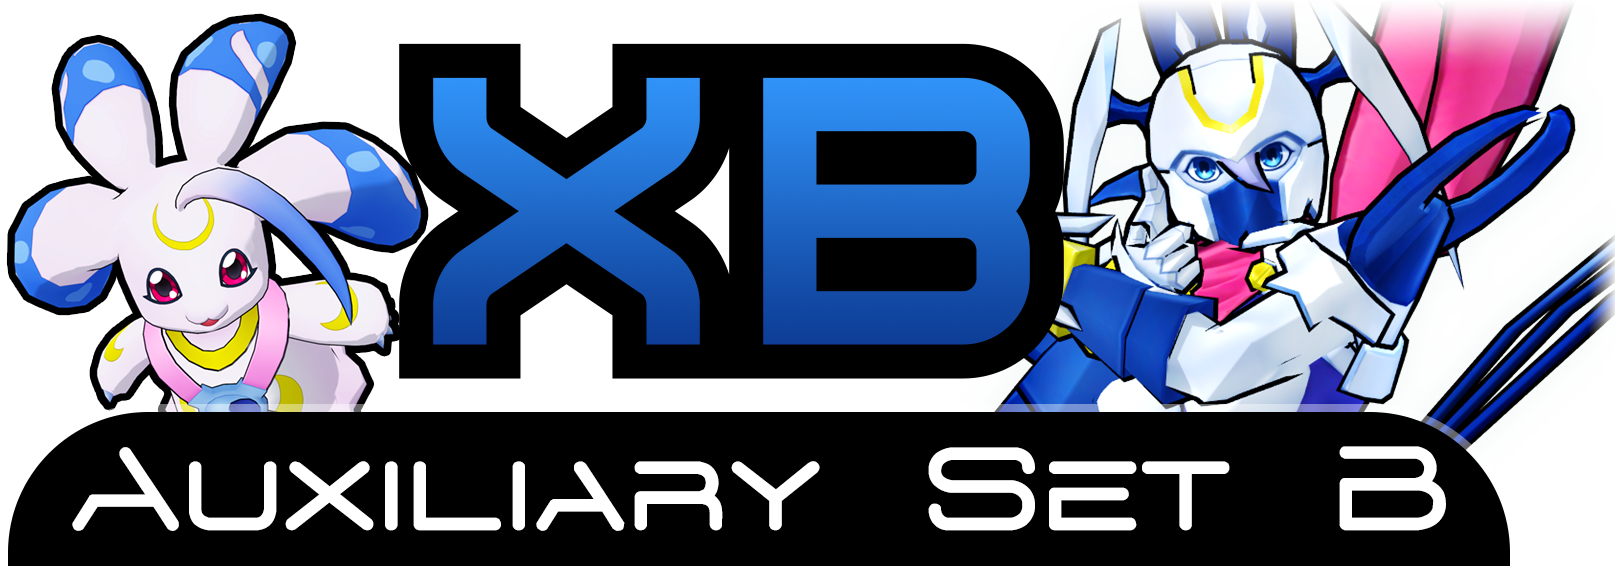 Logo for set XB with Lunamon and Dianamon